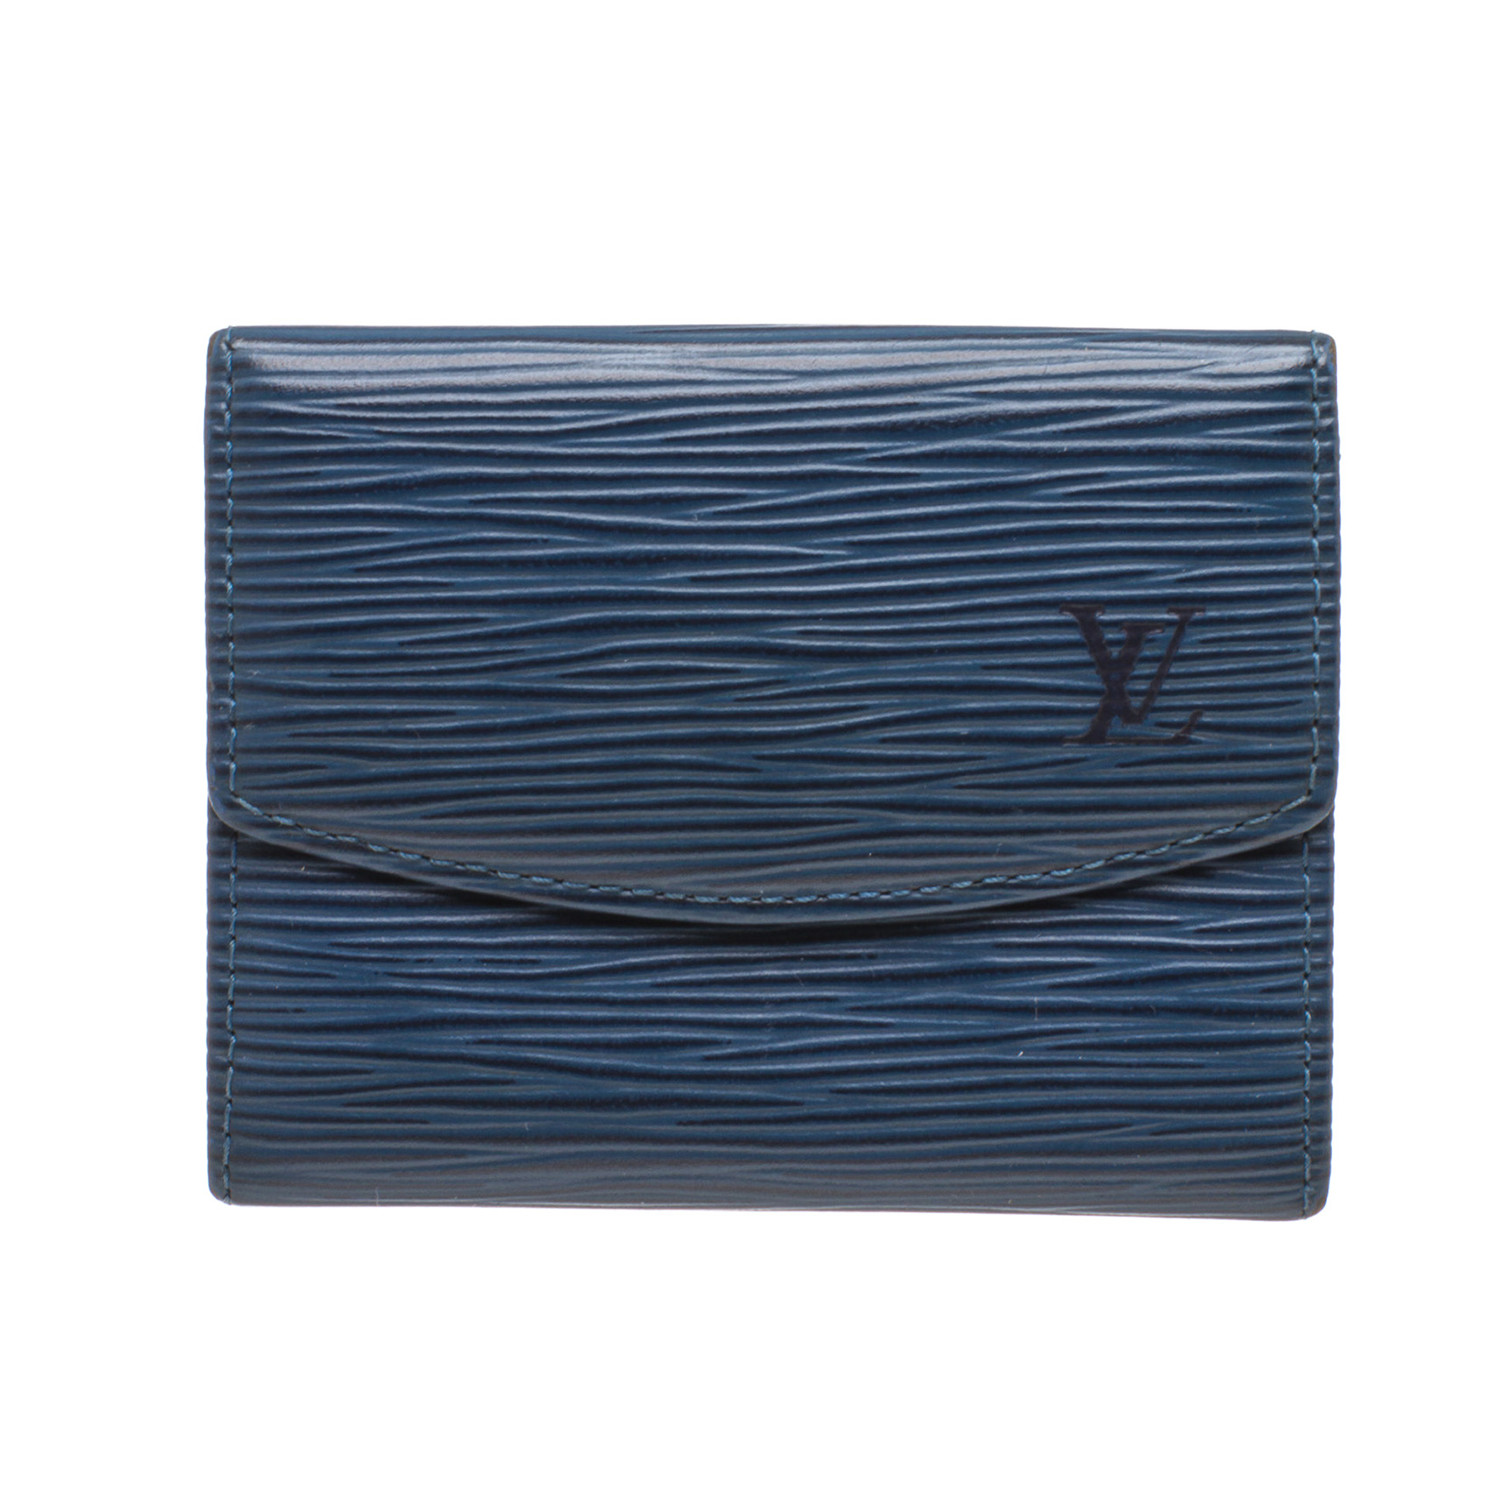 Louis Vuitton Pre-owned Leather Cardholder